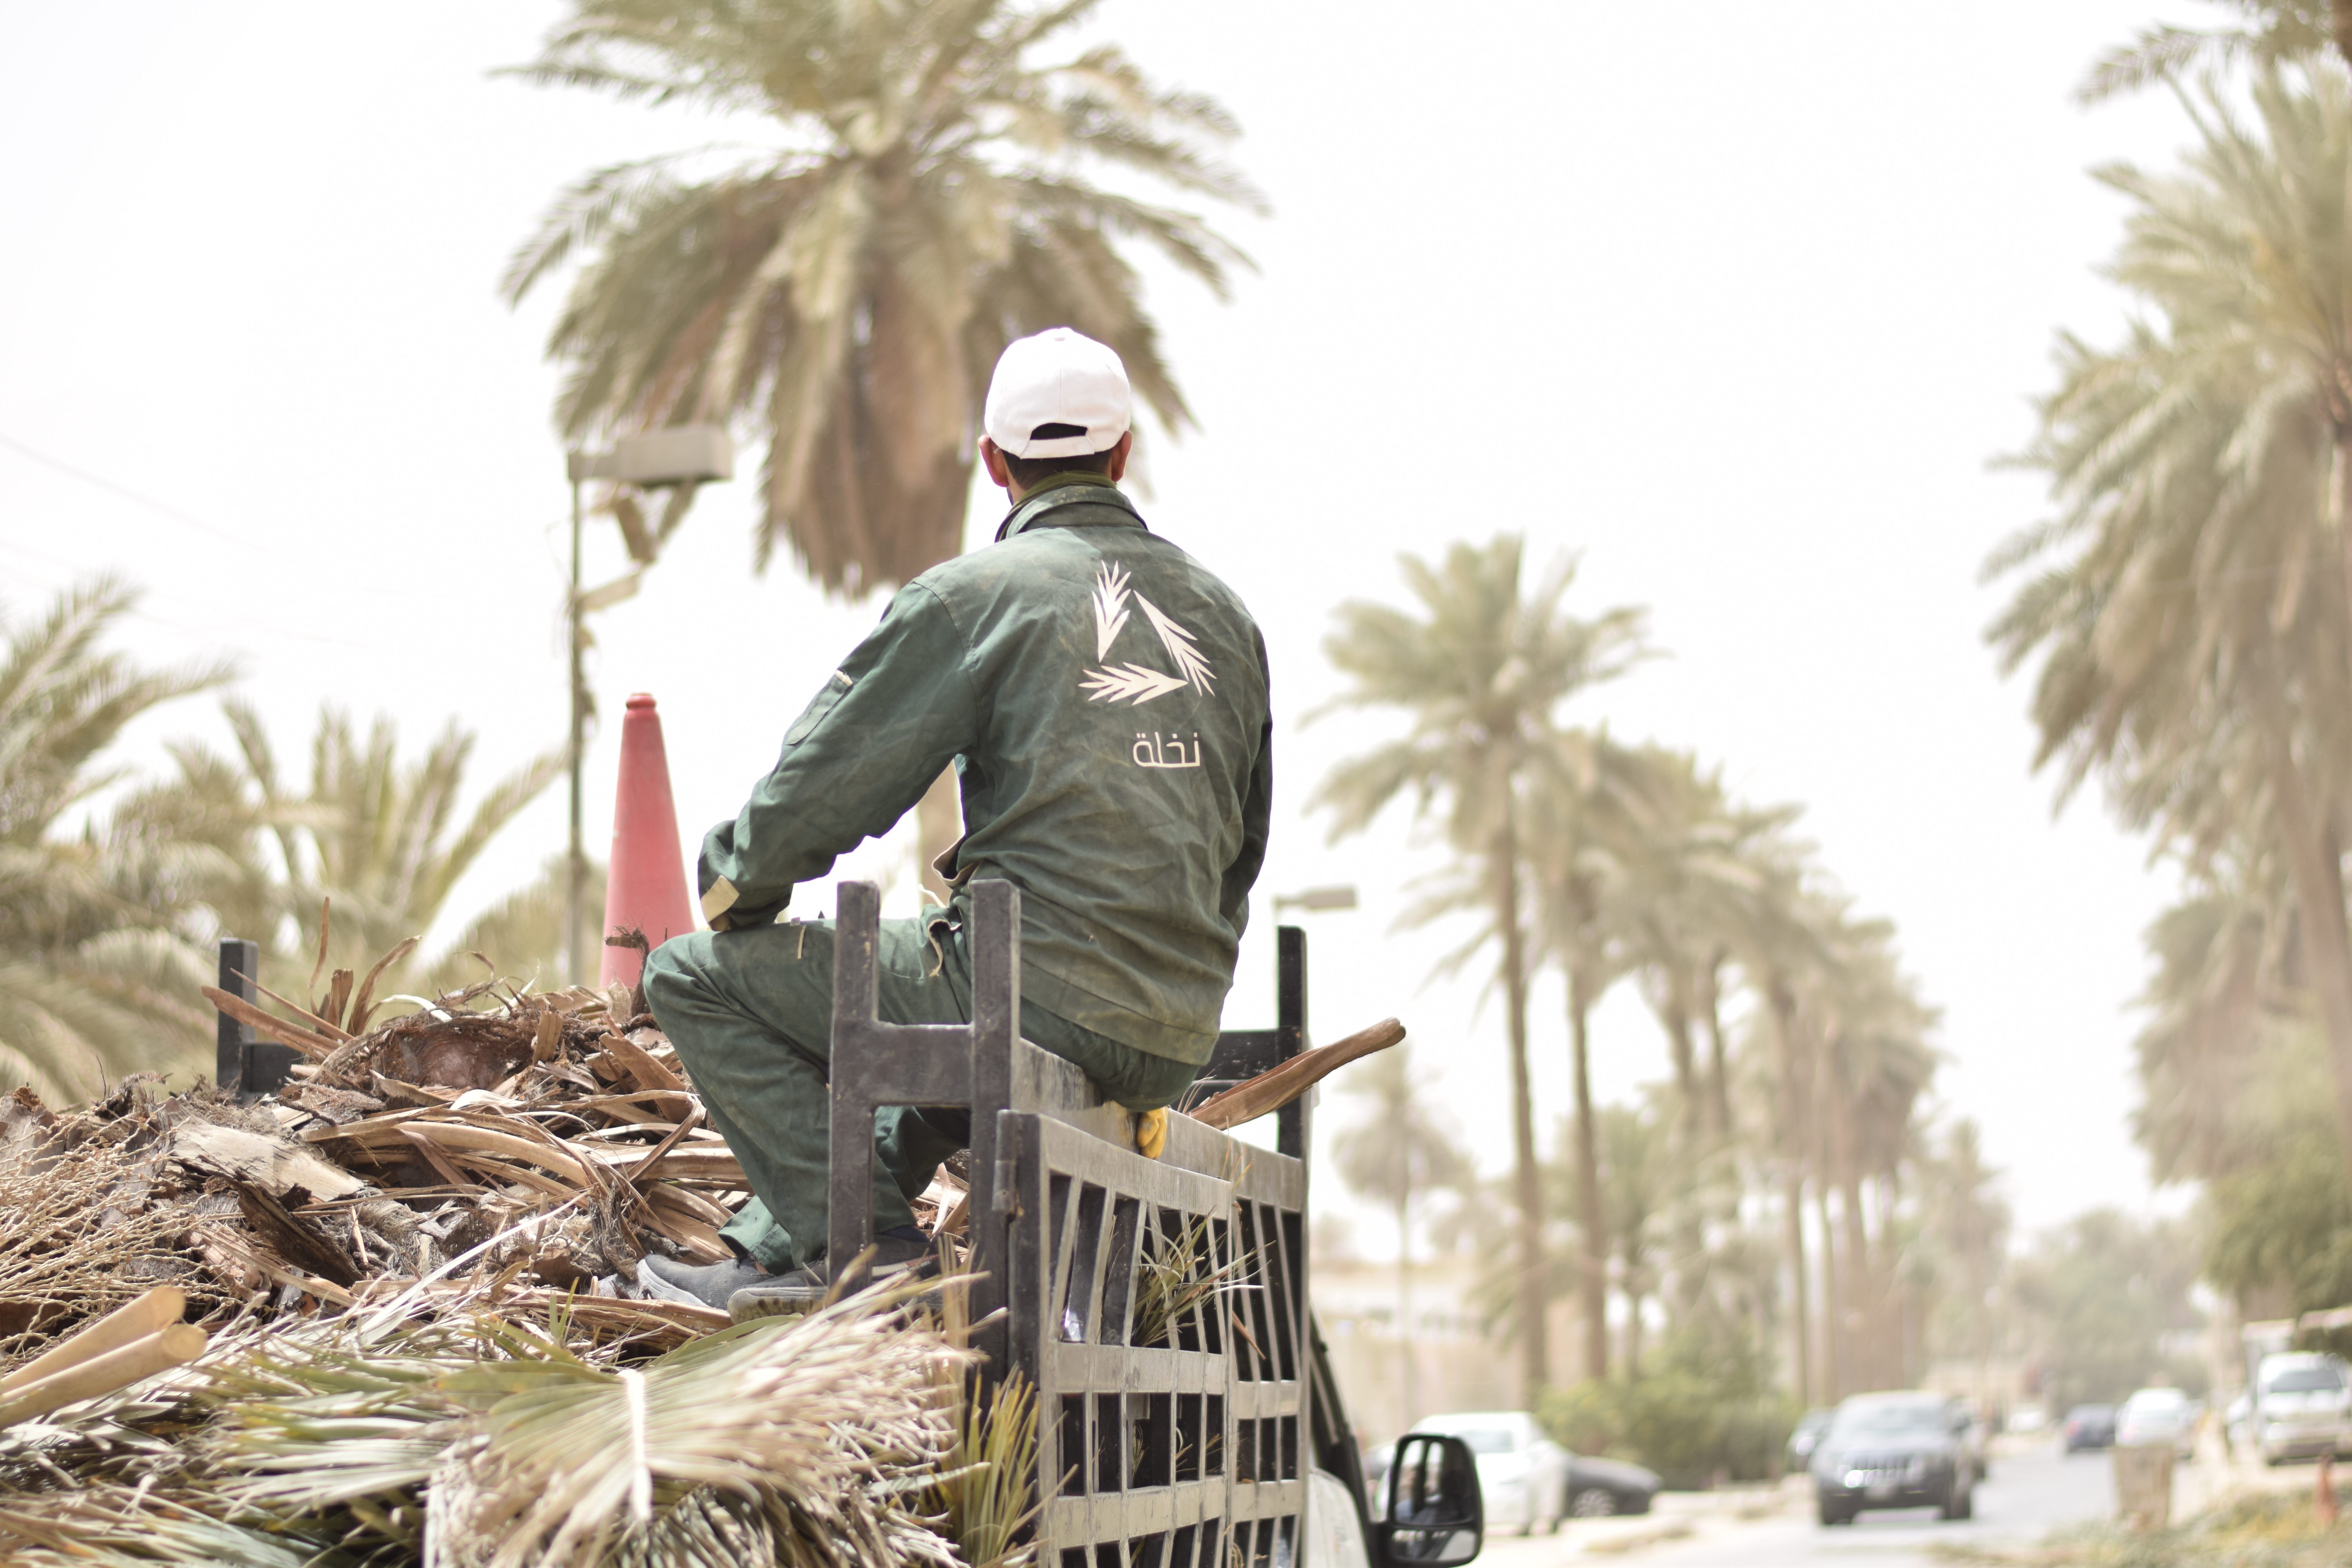 The company also provides tree-care services to keep palms thriving. 